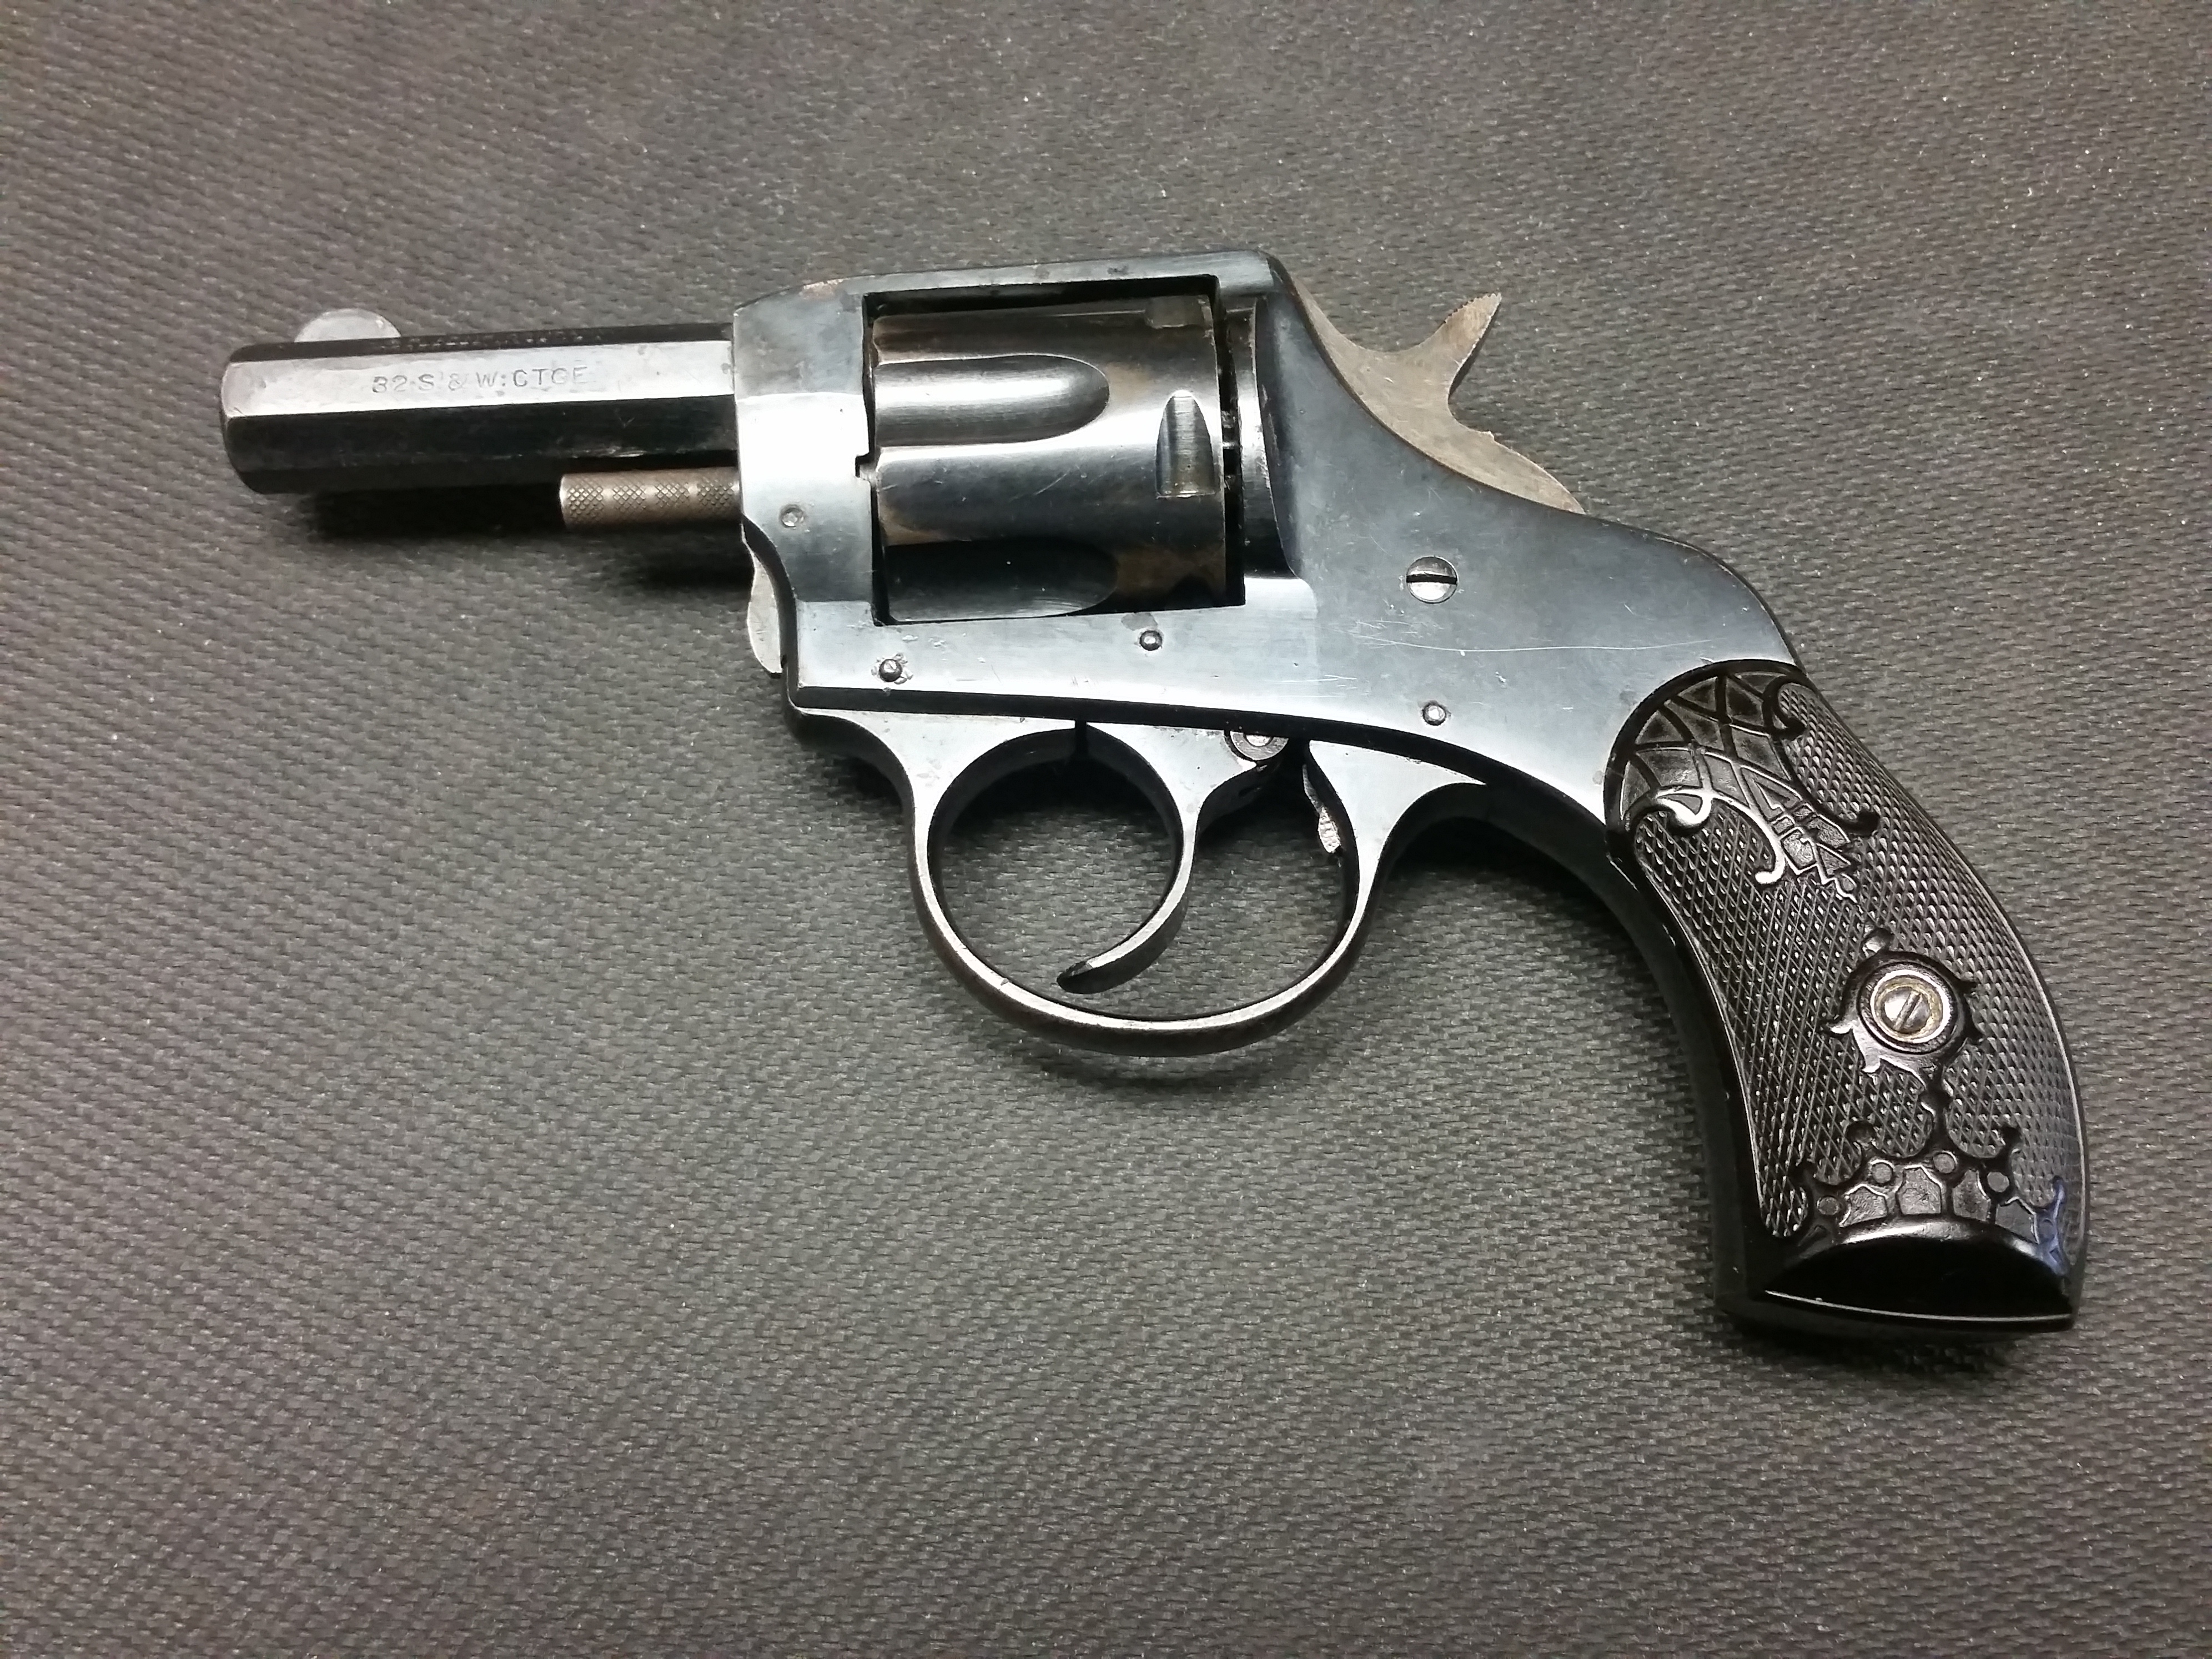 H&R Model the american 32 S&W double action Revolver 6 shot